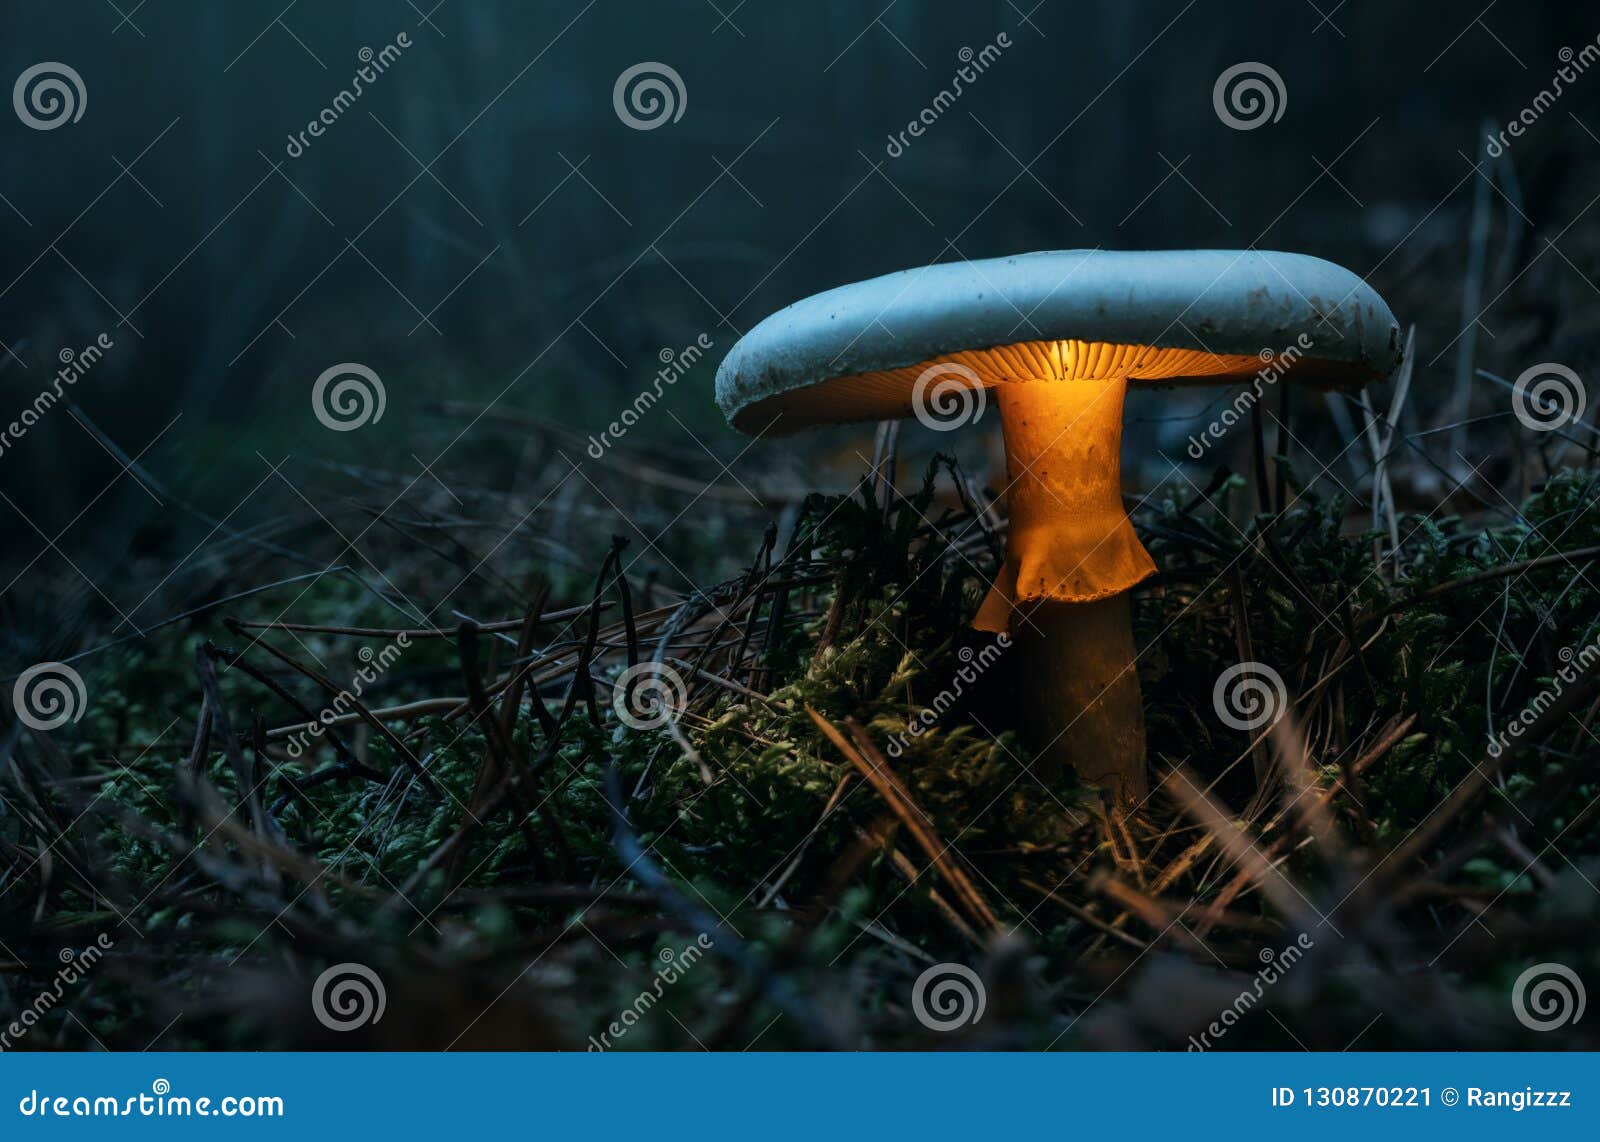 fairy, glowing mushroom in the forest